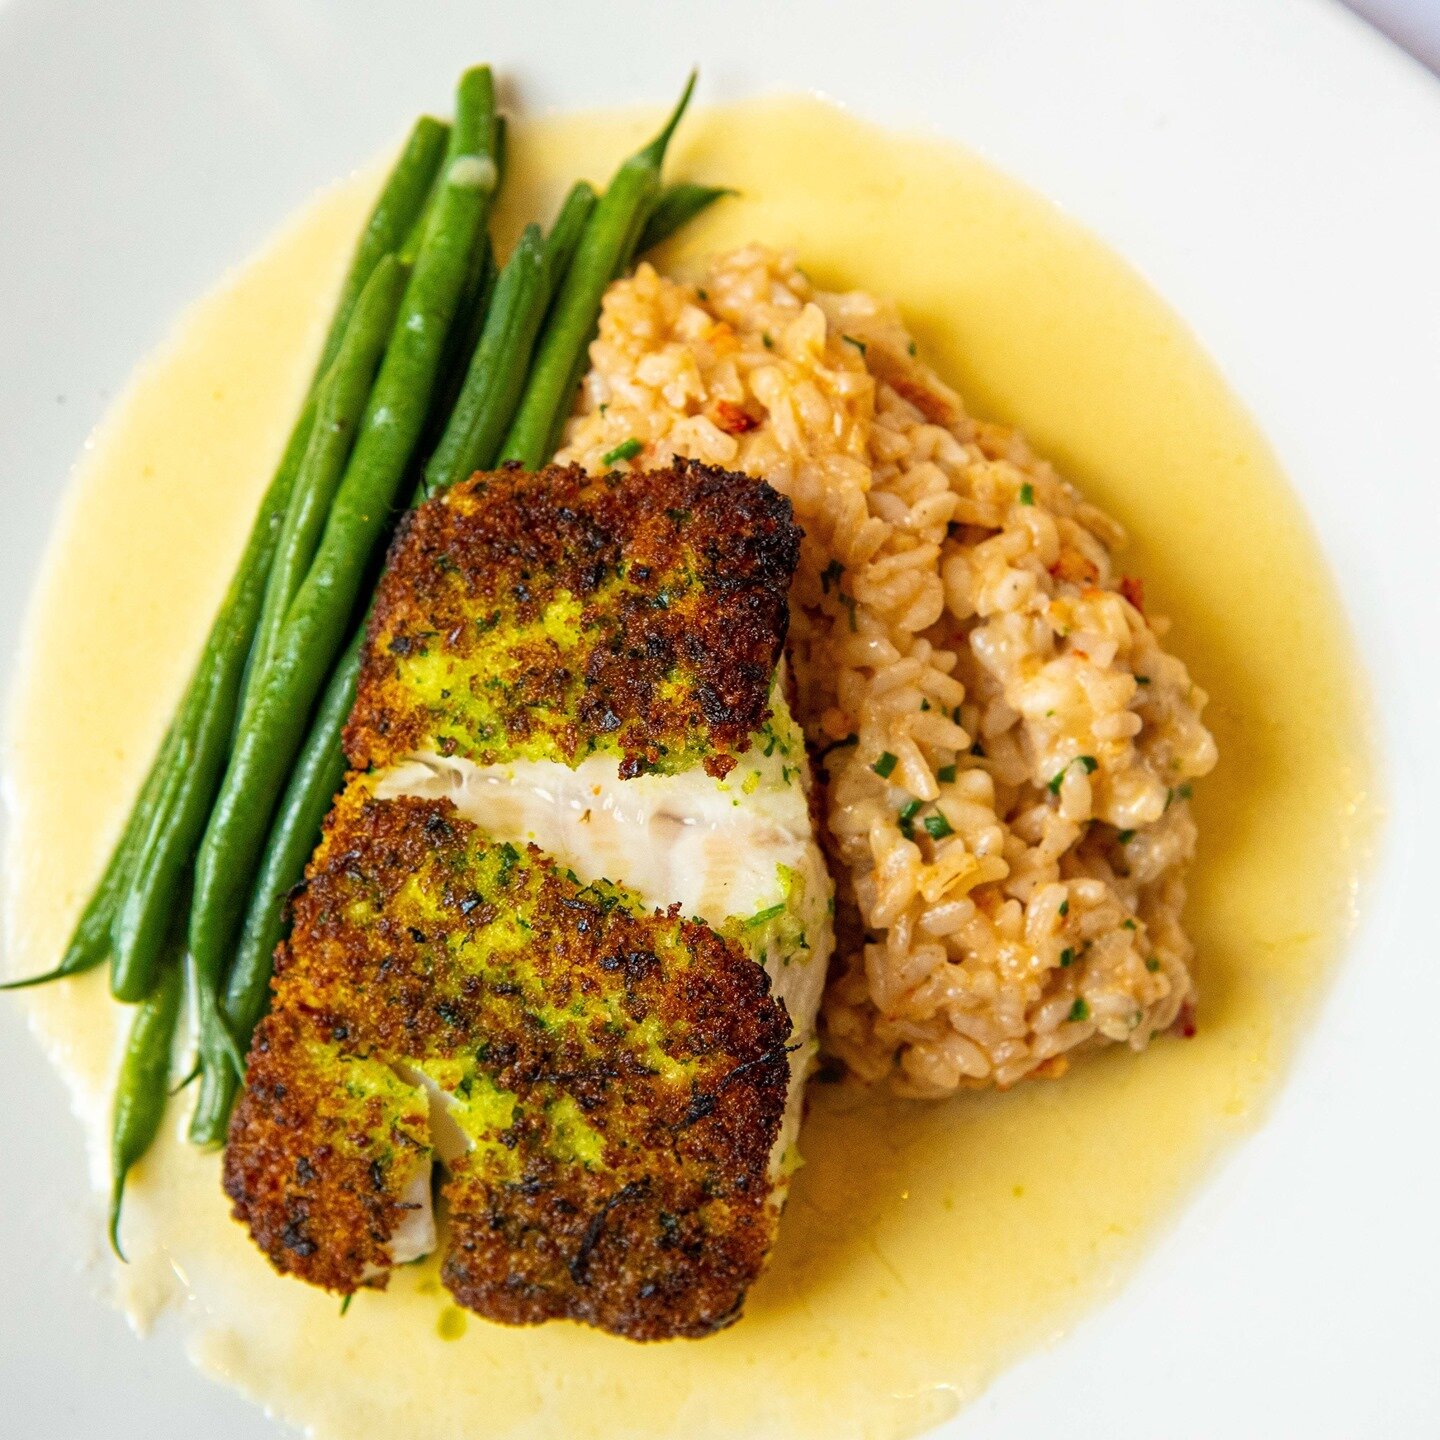 This Friday's Lenten Special is...⁠
⁠
Herb Crusted Boston Cod with Maine Lobster Risotto, Haricot Vert and Lemon Butter Sauce.⁠
⁠
Dine with us tonight, don't forget to book your reservation!⁠
⁠
#special #fishspecial #featuredfish #fishfriday #fishfry